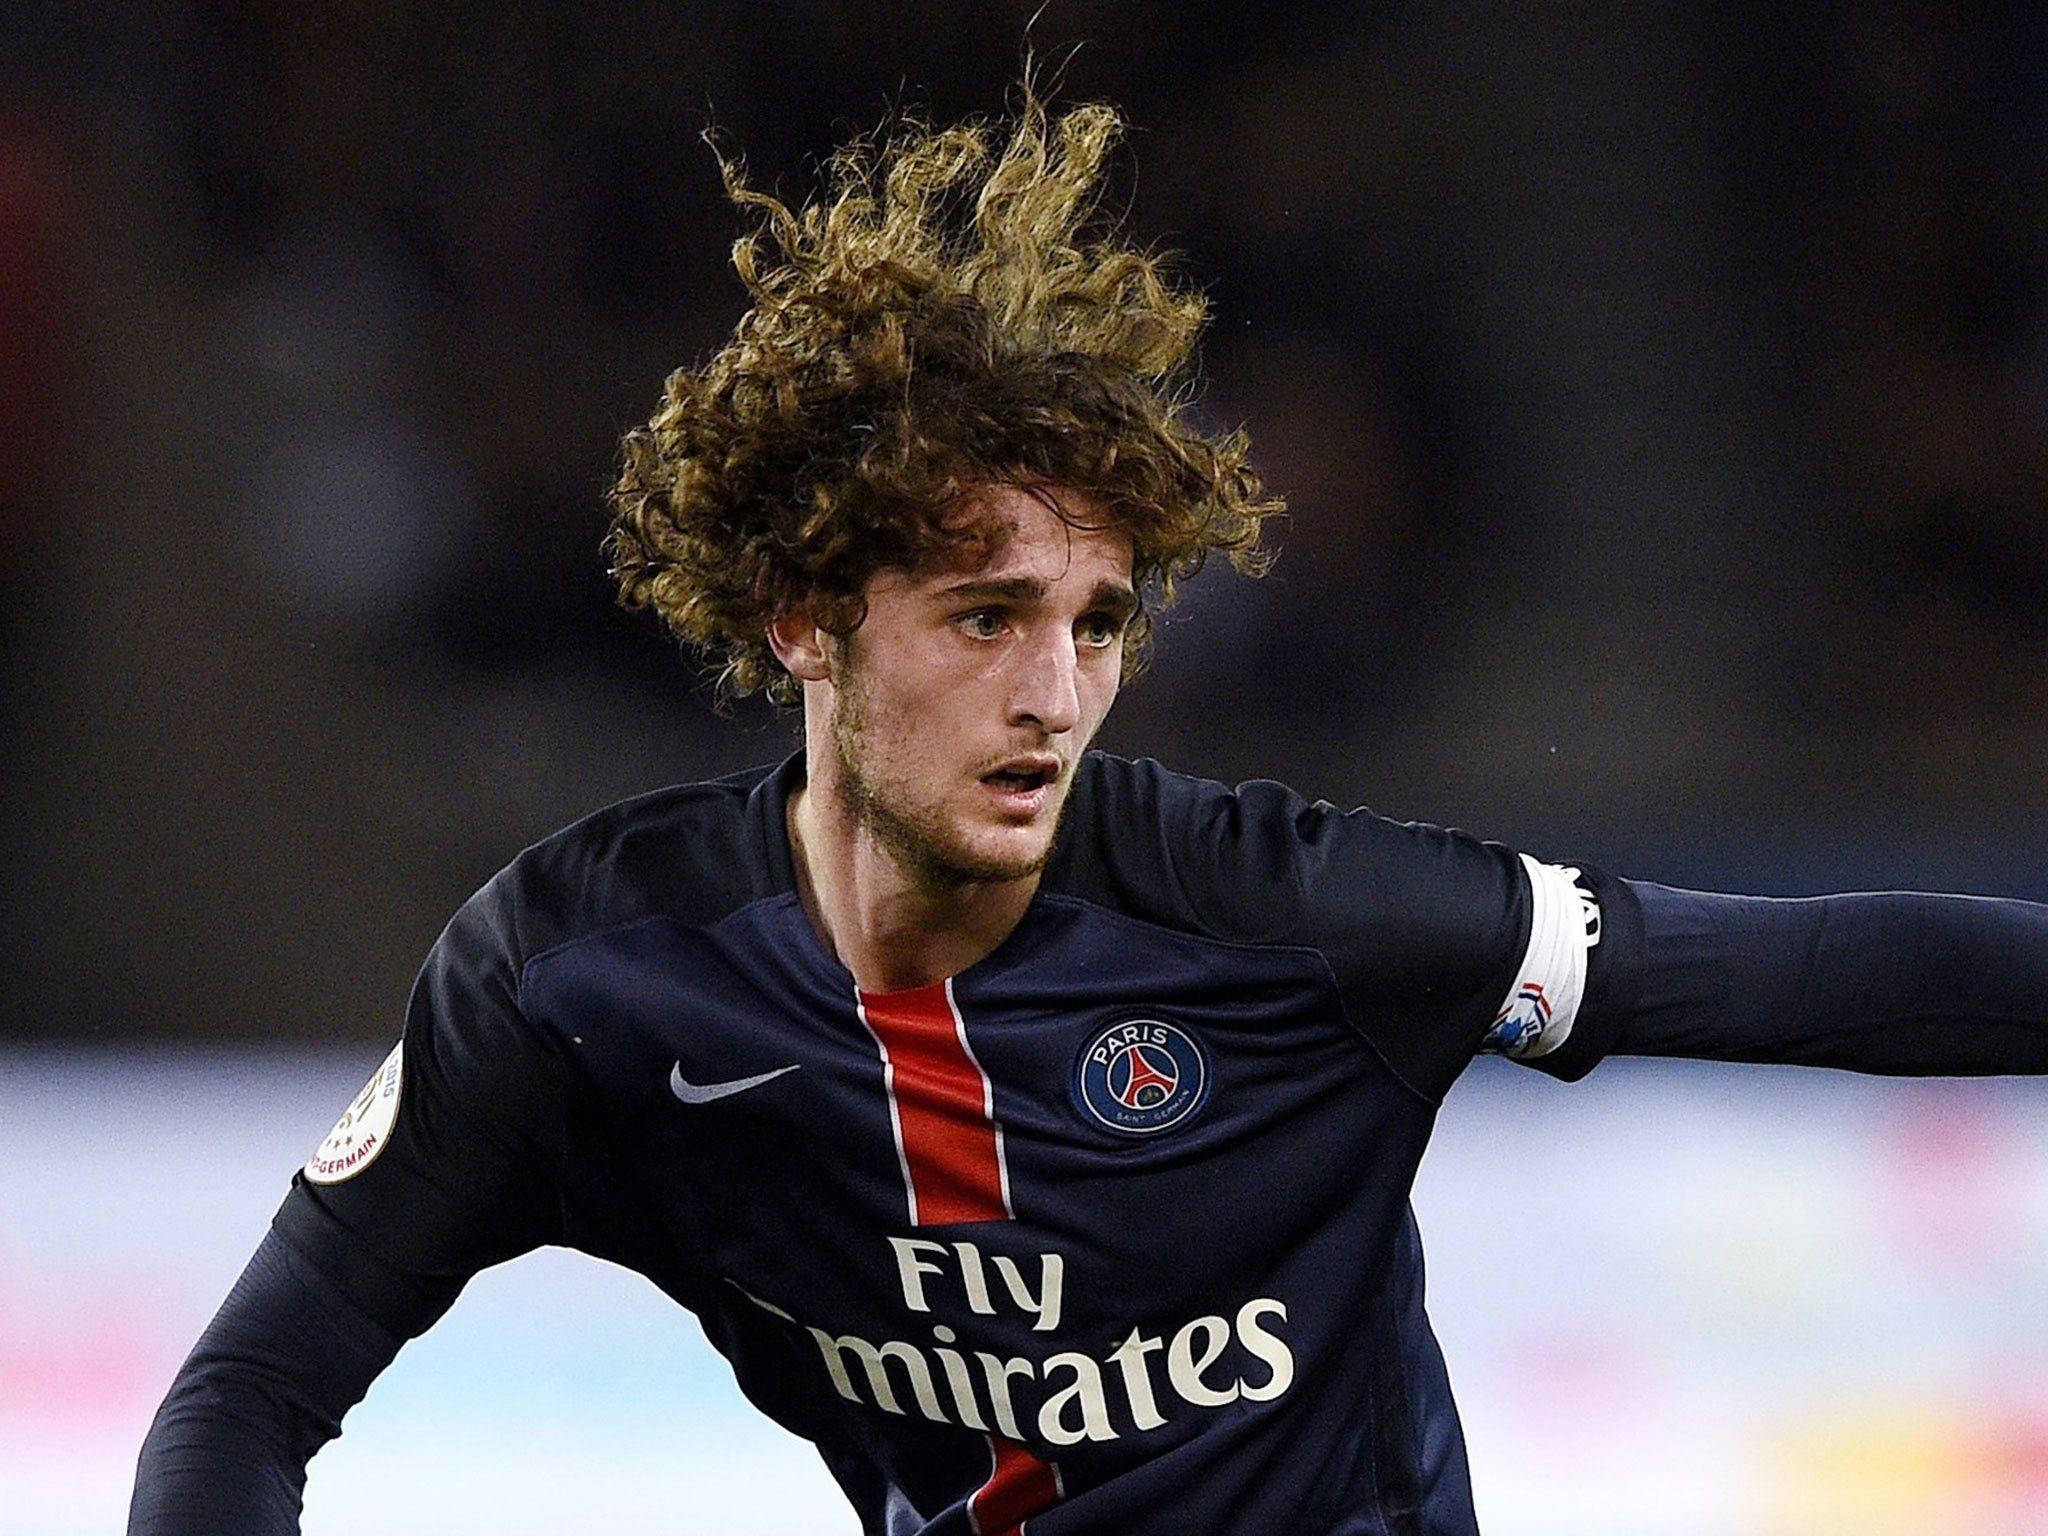 Adrien Rabiot to Arsenal: PSG midfielder has submitted transfer